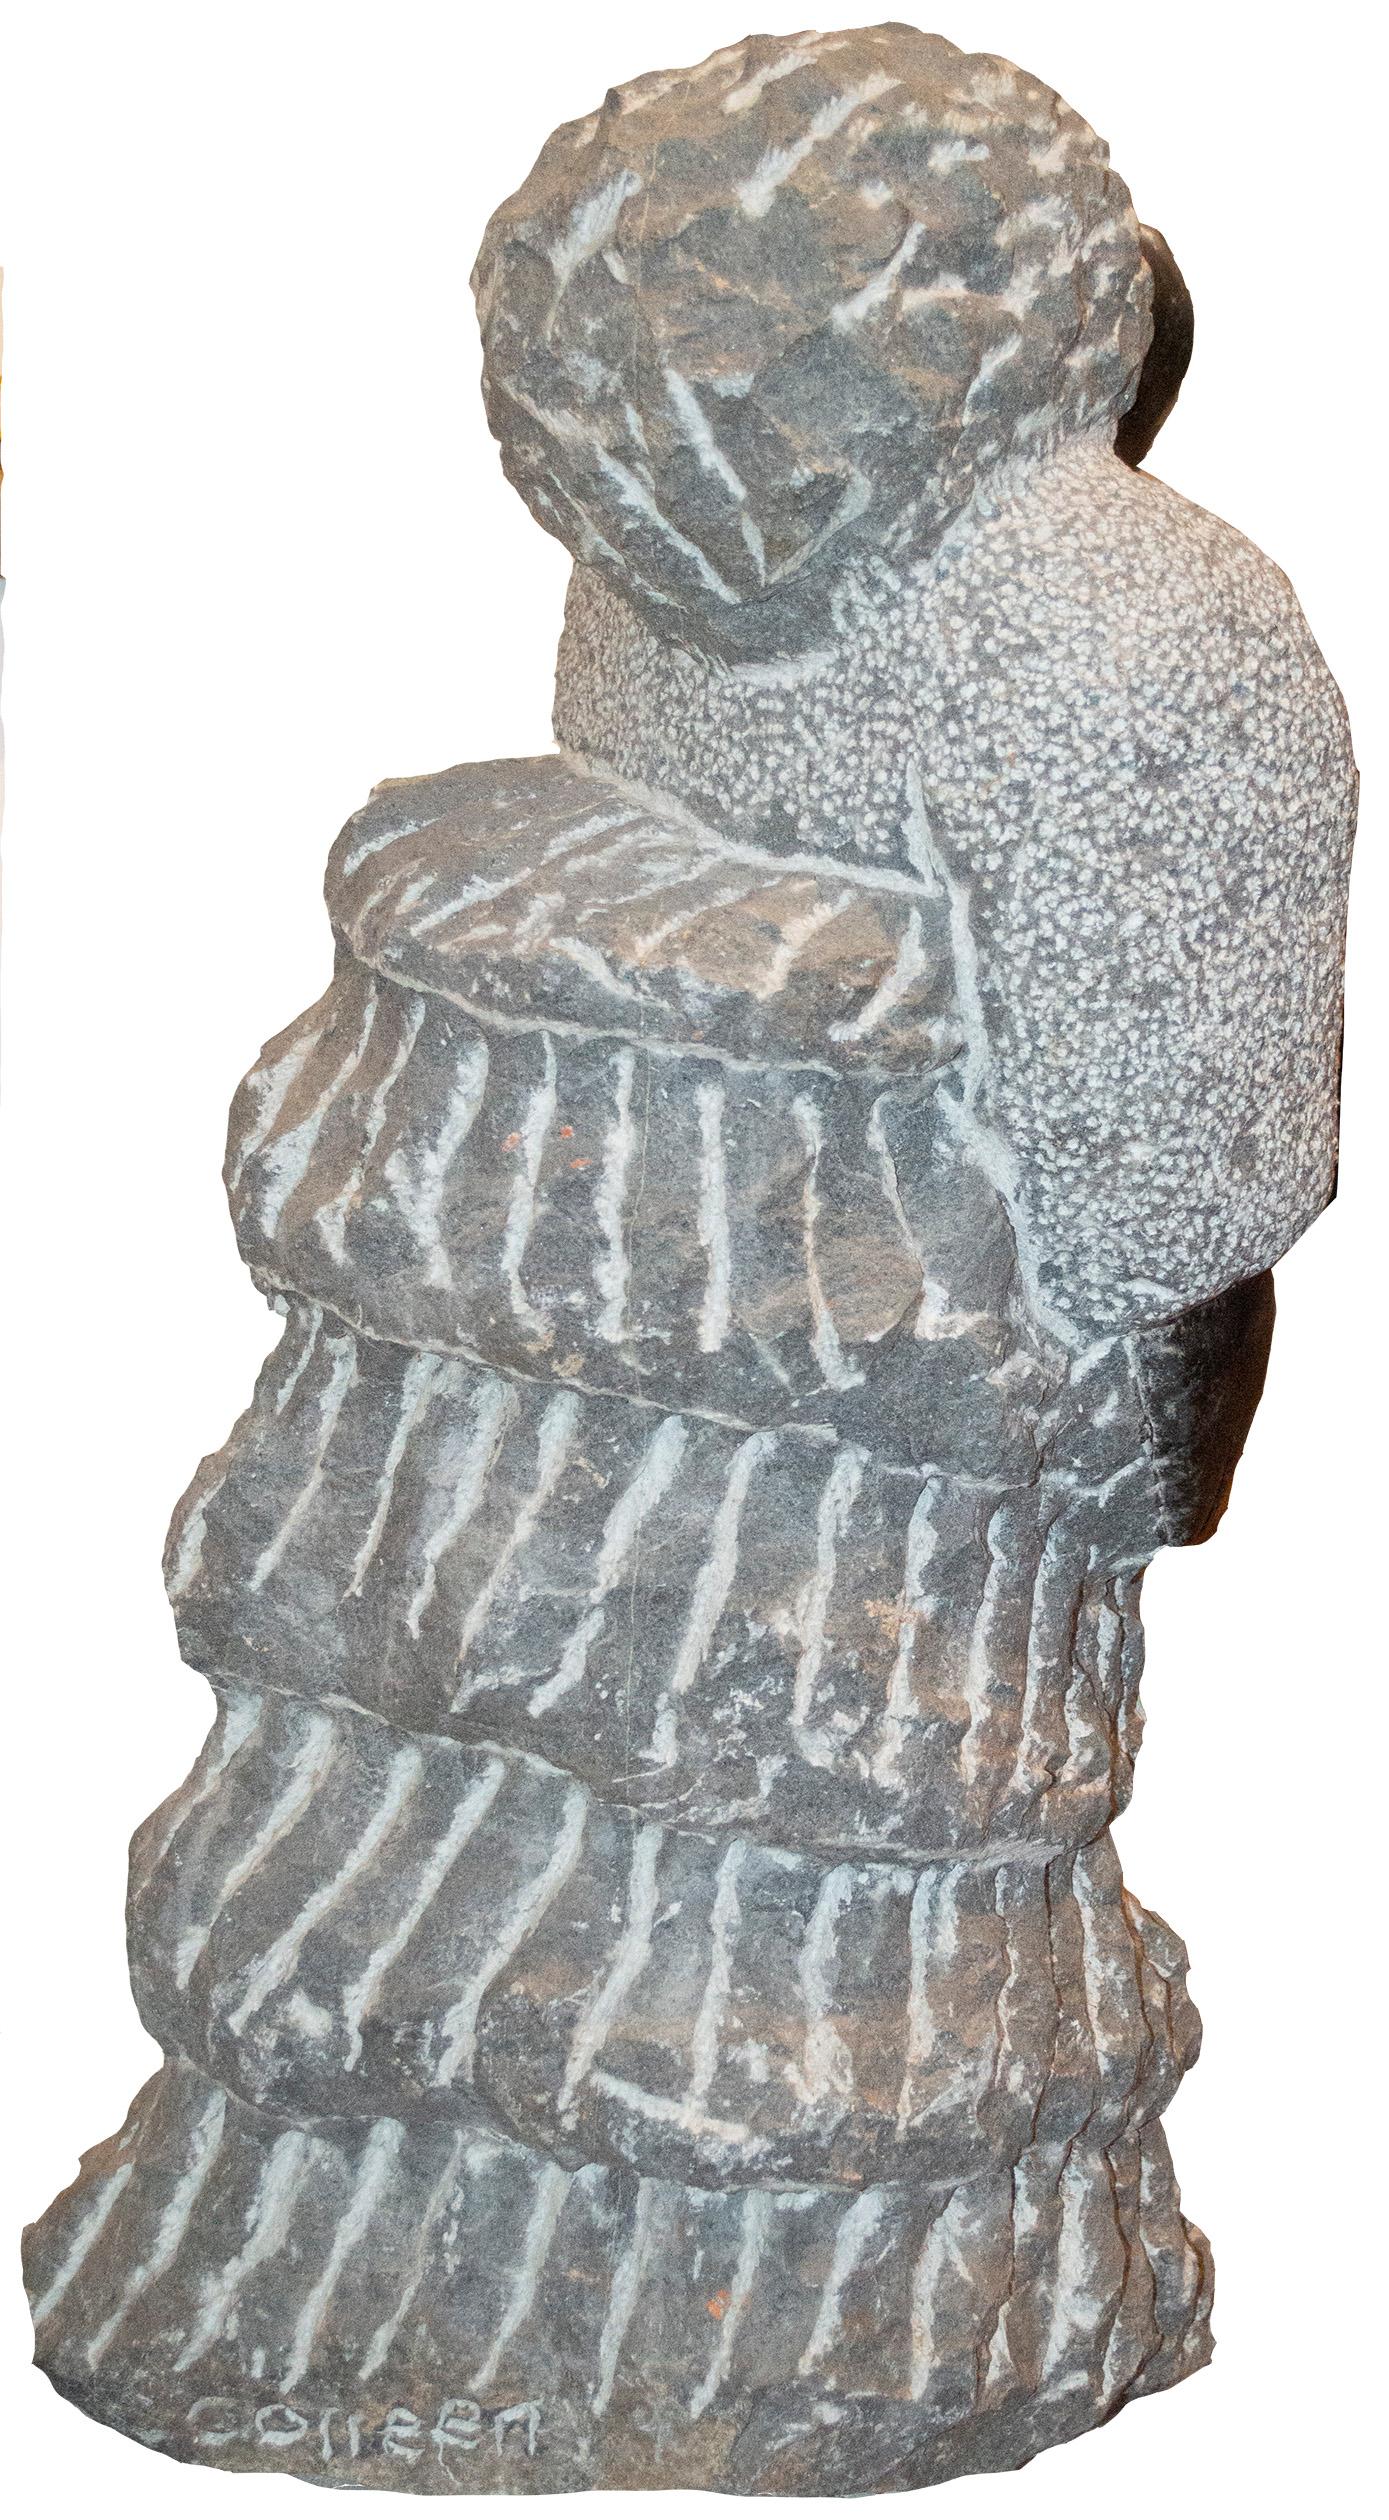 'Feeling Heart Beat' is an original black serpentine sculpture by the celebrated second generation Shona artist Colleen Madamombe. The sculpture presents a character common to Madamombe's work: a woman with a round face and wearing a billowing,